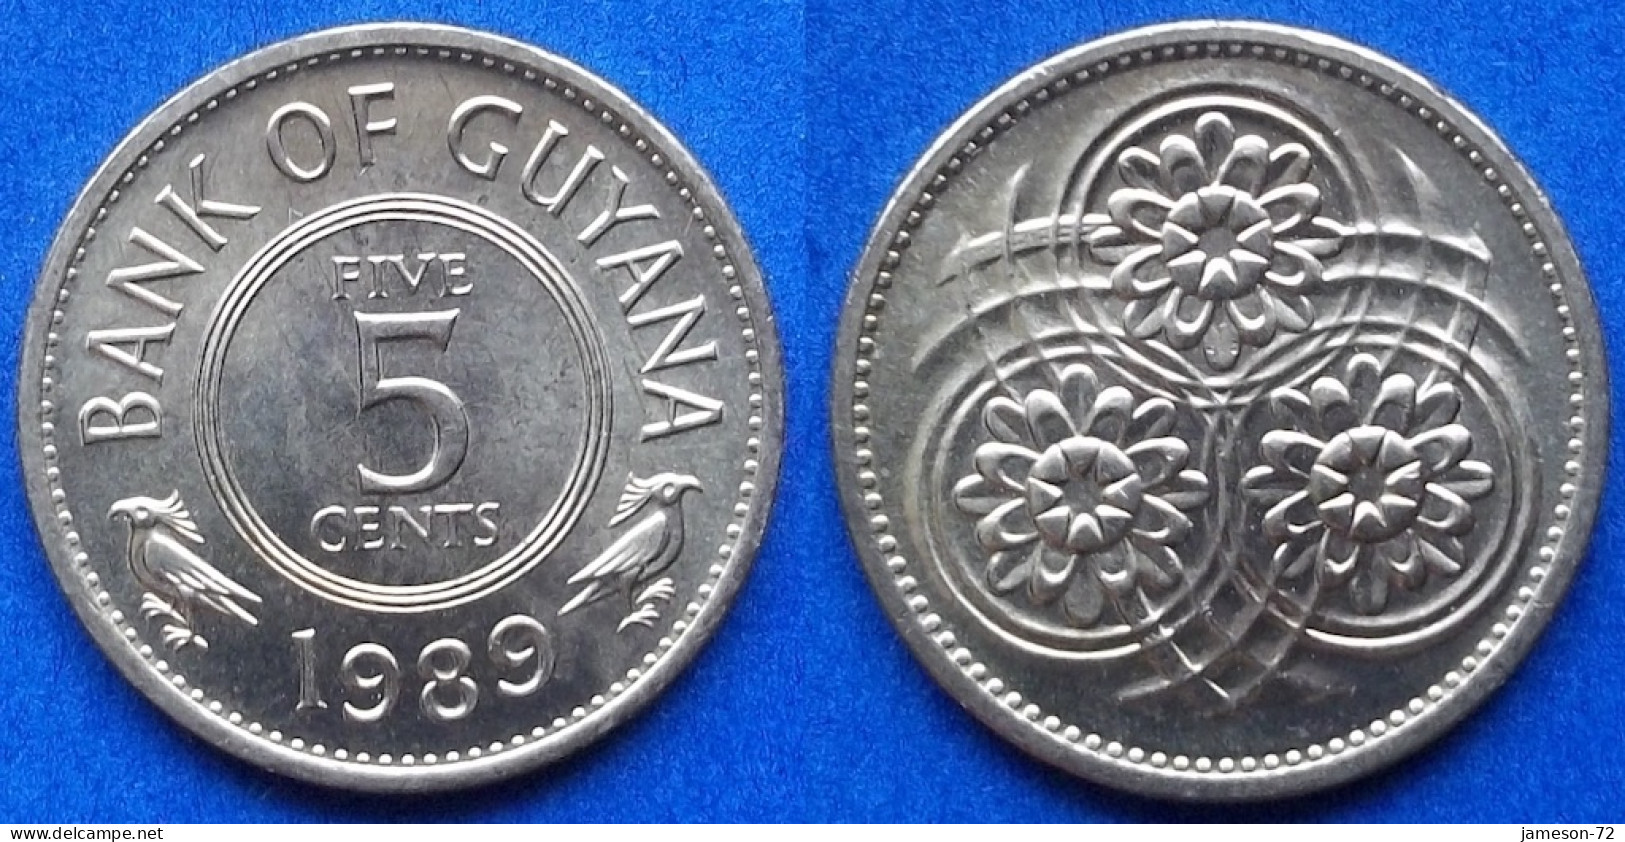 GUYANA - 5 Cents 1989 KM# 32 Independent Since 1966 - Edelweiss Coins - Guyana